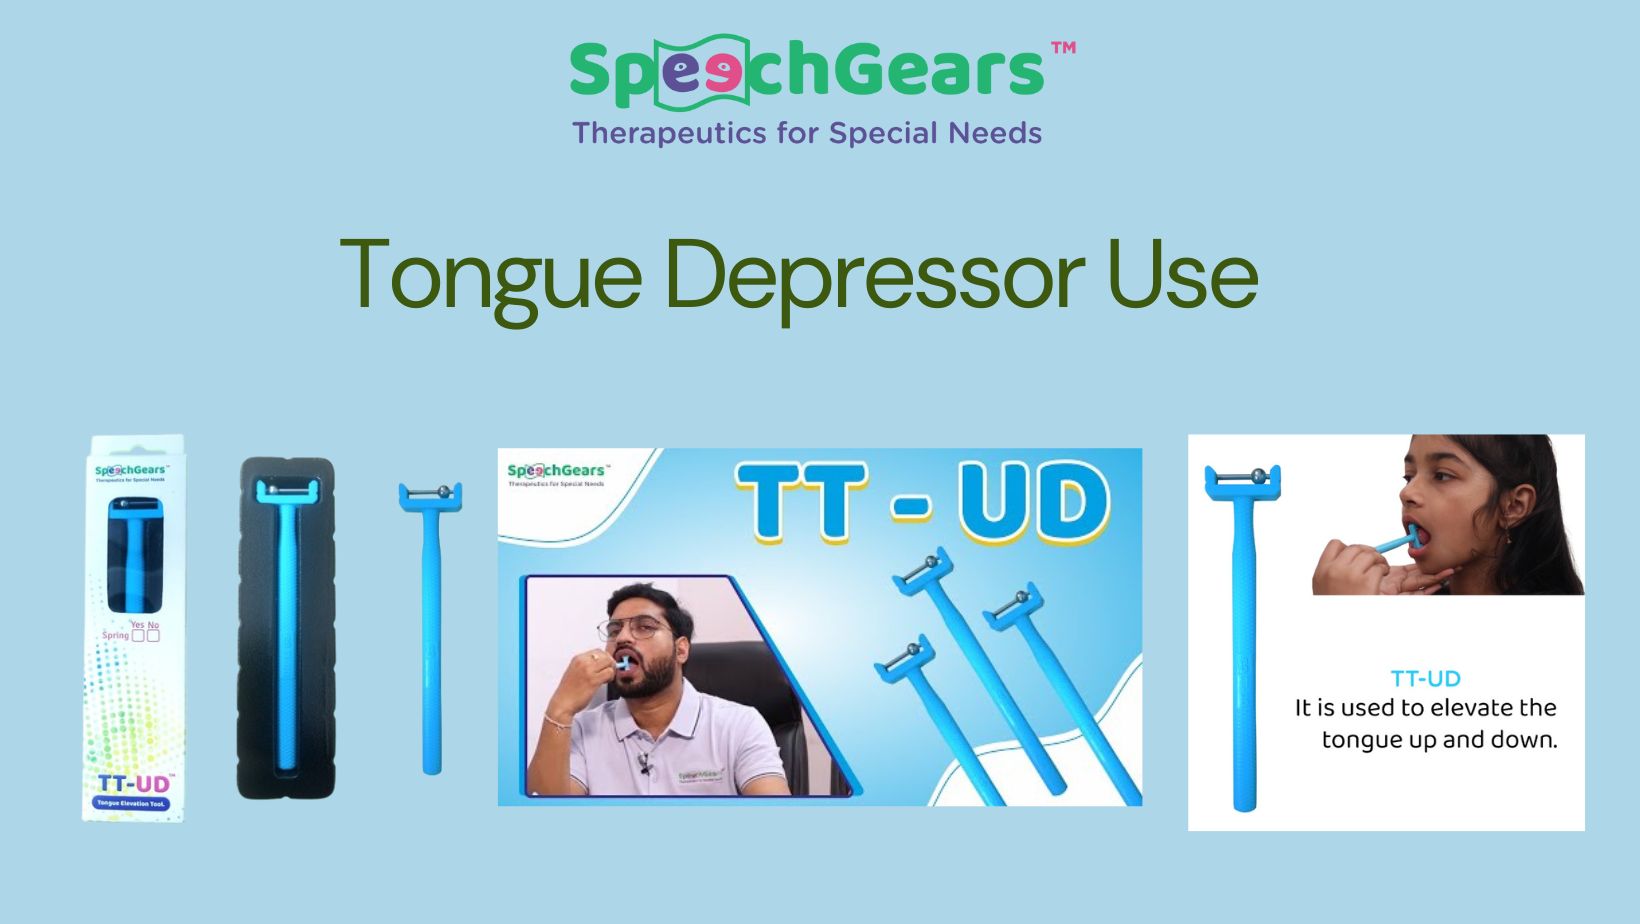 The Essential Role of Tongue Depressors and Tongue Elevation Tools in Speech Therapy - TopBlogLogic: Mastering the Art of Digital Influence